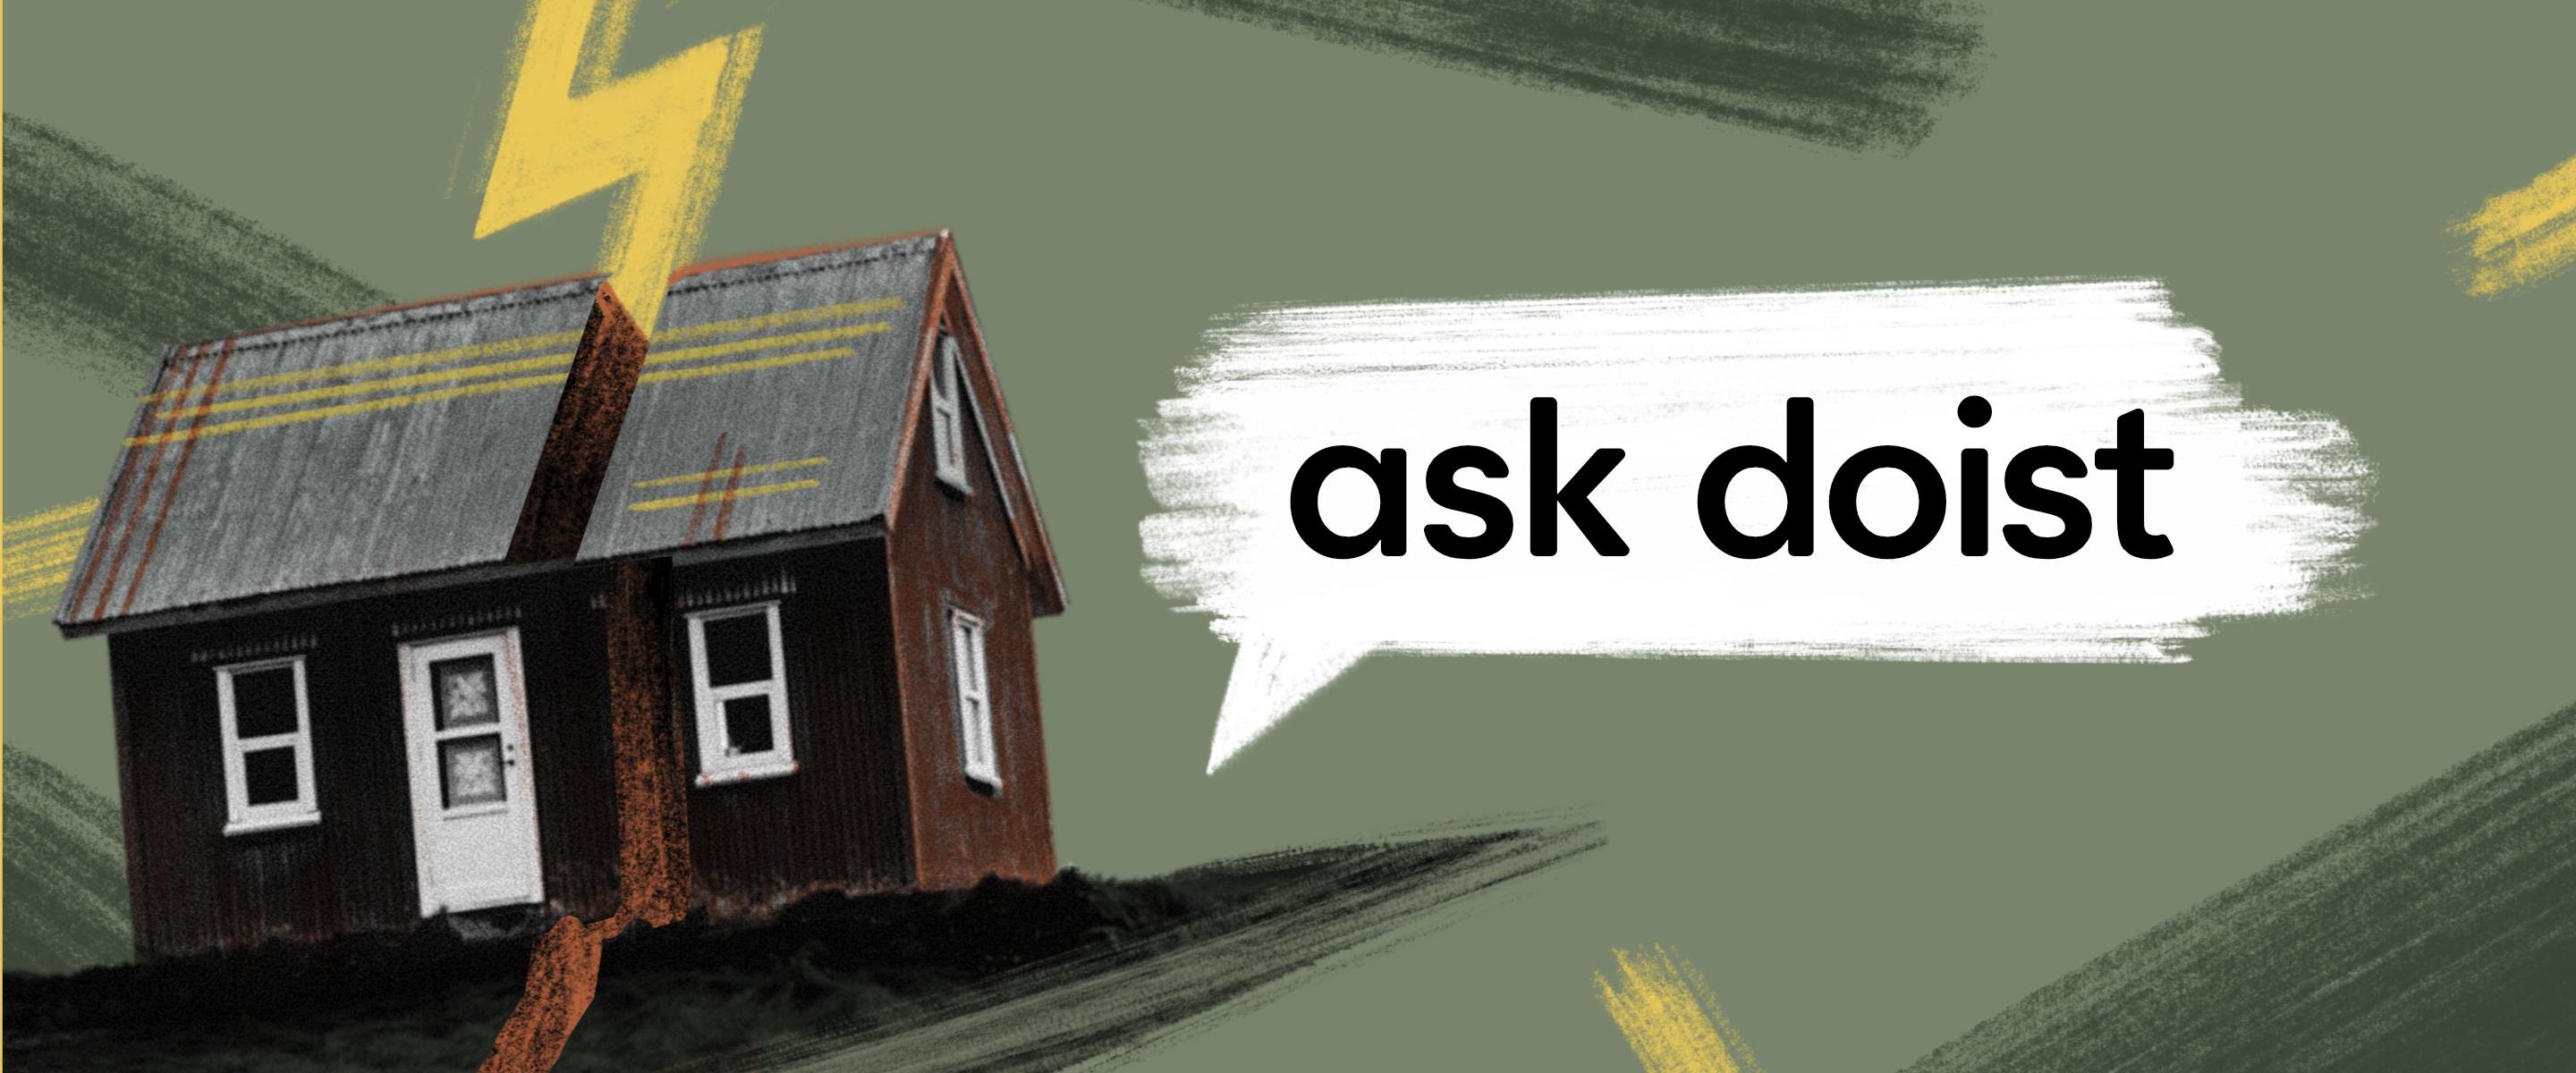 Ask Doist Home Projects Banner Margarida